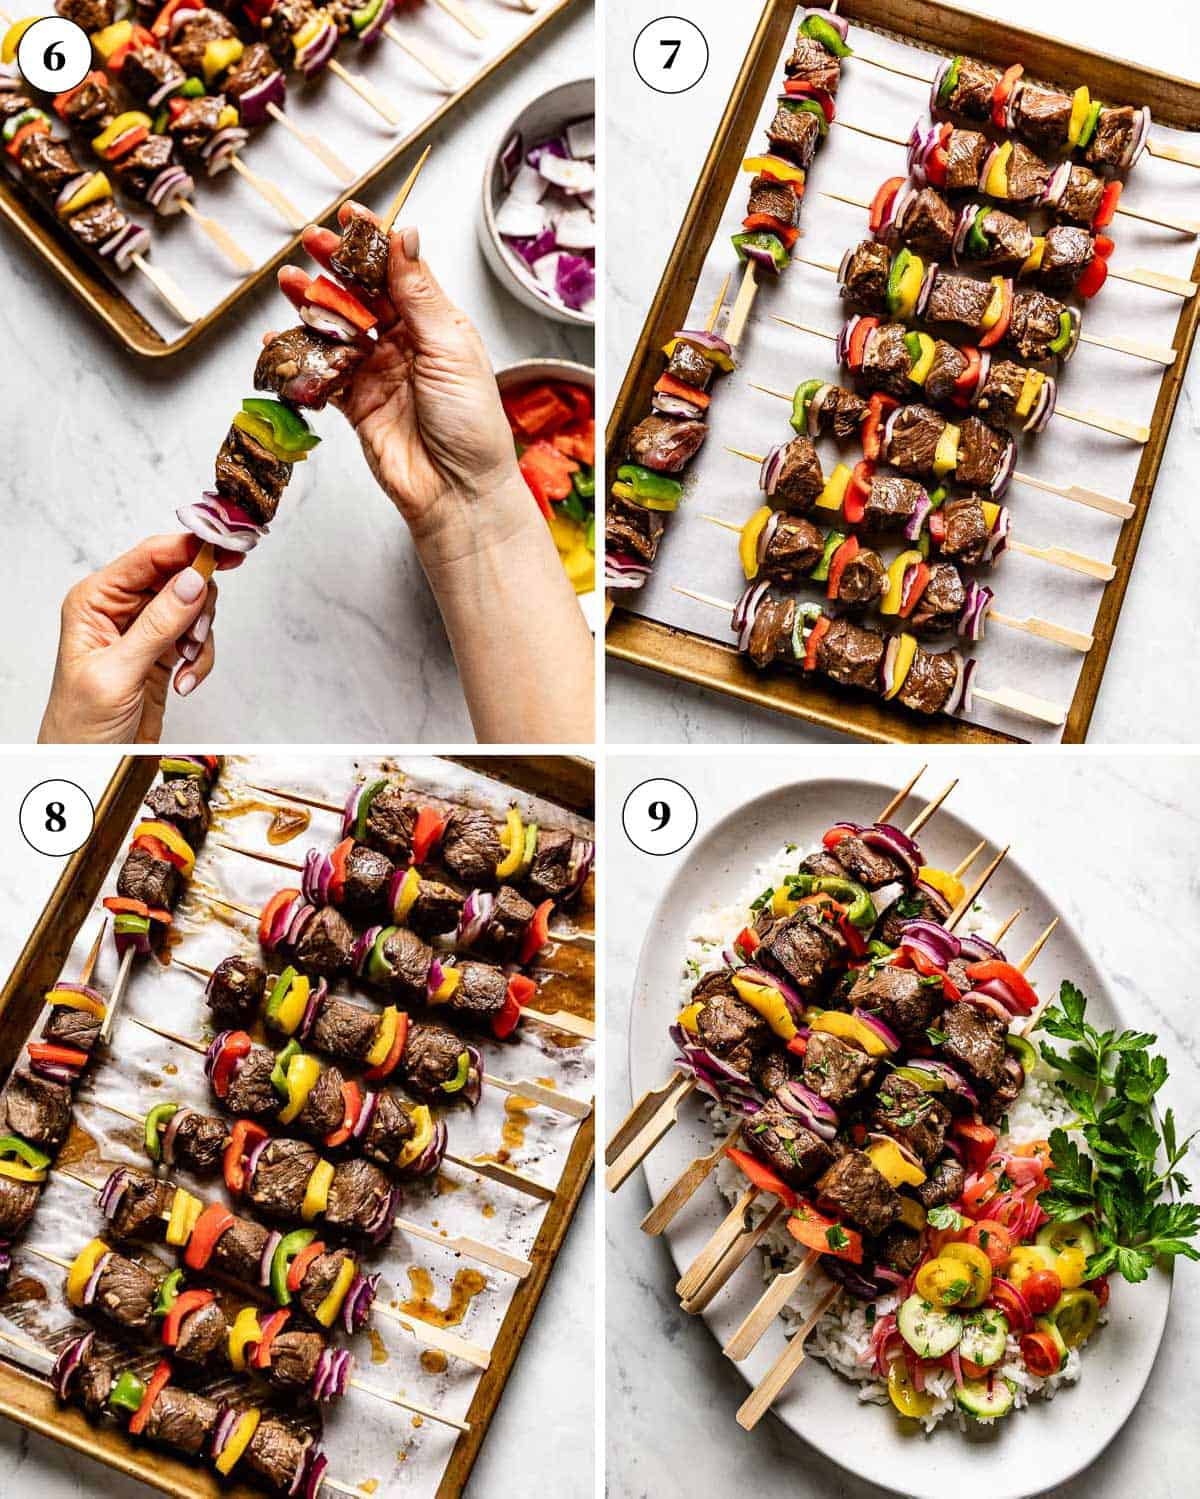 A collage of images showing how to thread beef and vegetables to make steak kabobs.